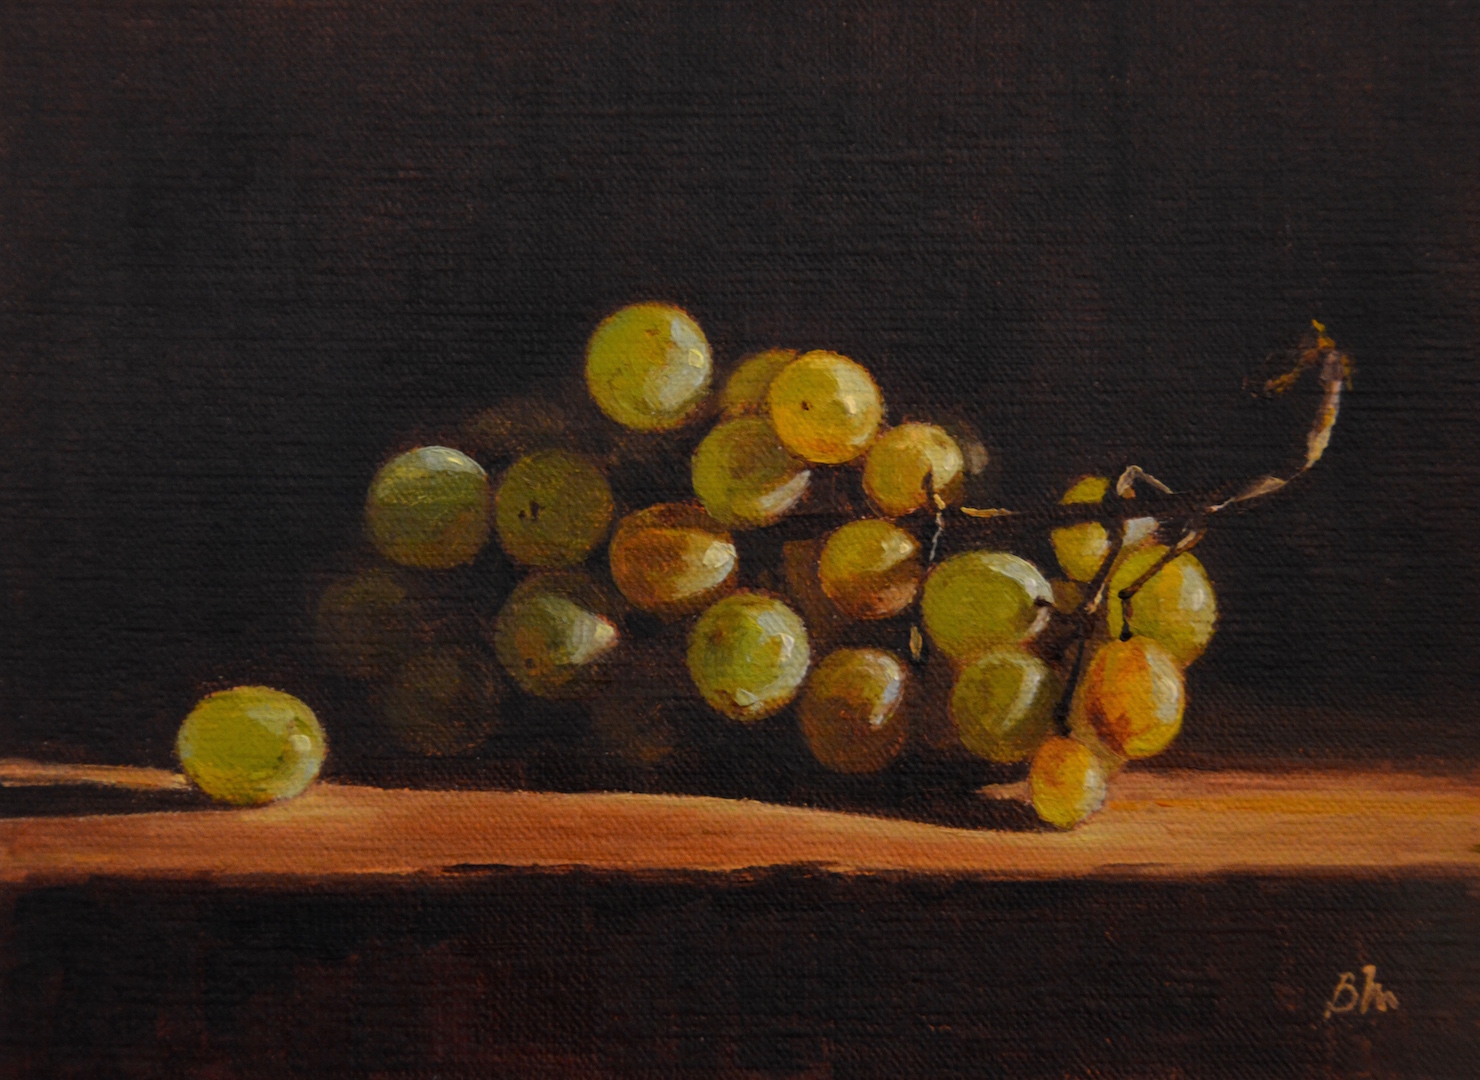 "Muscat Grapes" by Begoña Morton